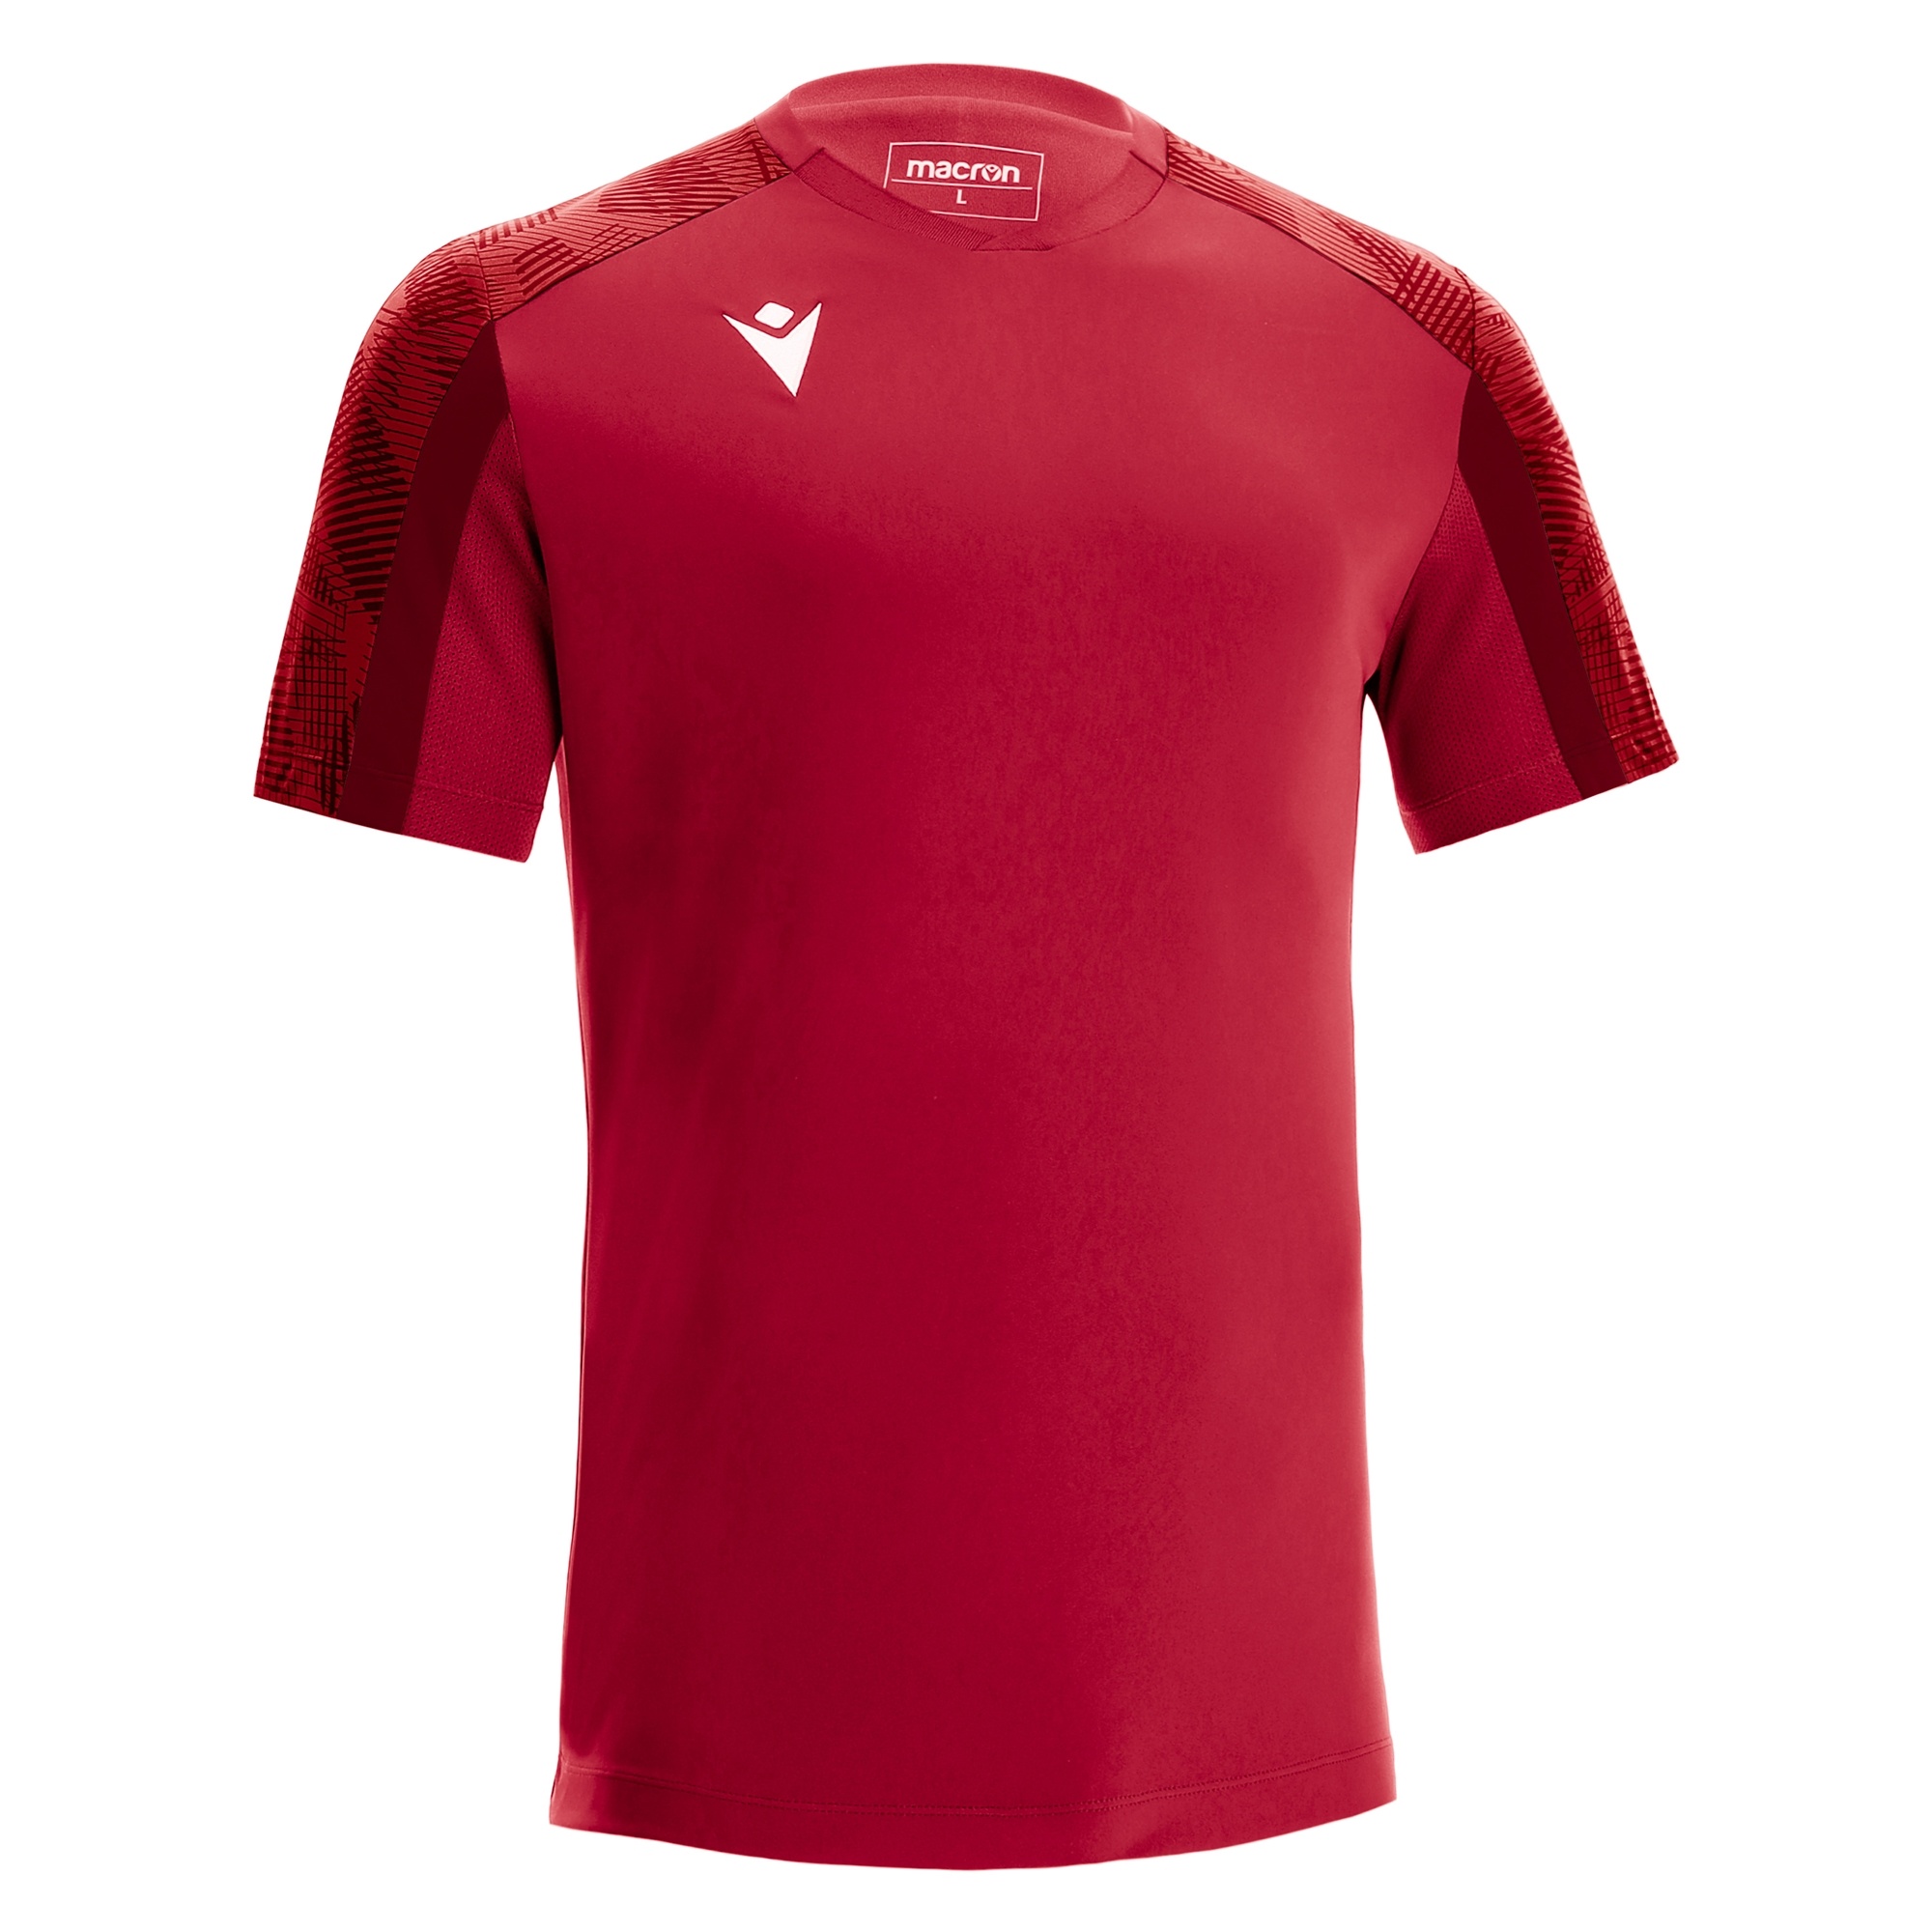 GEDE SHIRT RED/DRED SS,M Macron.rs